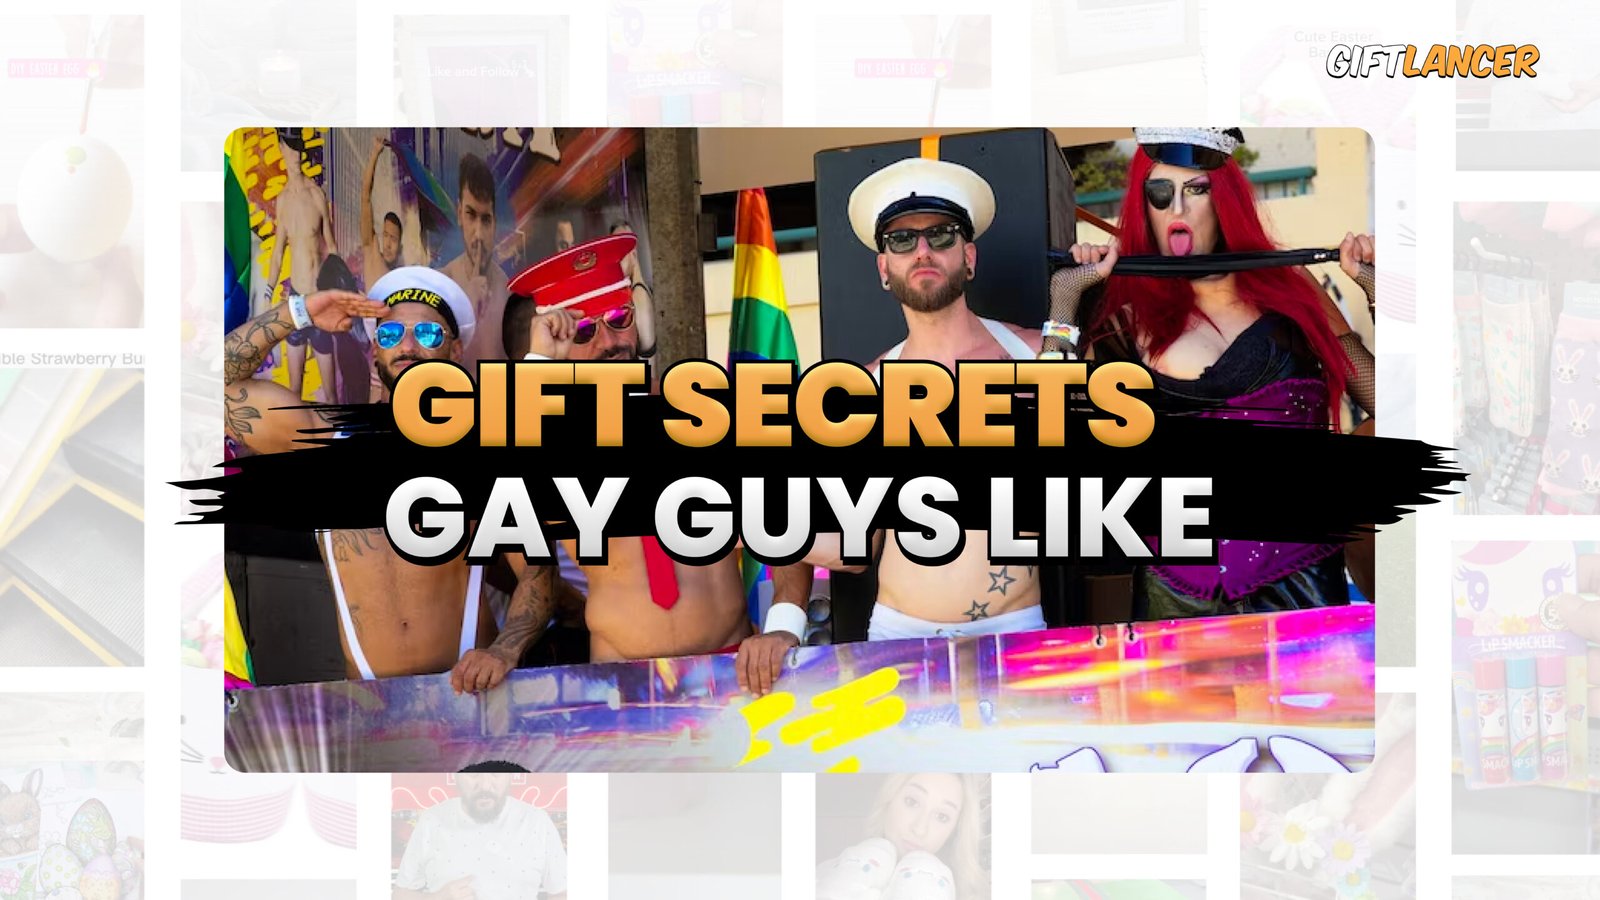 6 Special Valentine’s Day Gifts For Gay Guys : A Curated Selection By YouTube Sensation Eduard, An Award-Winning Creator.  